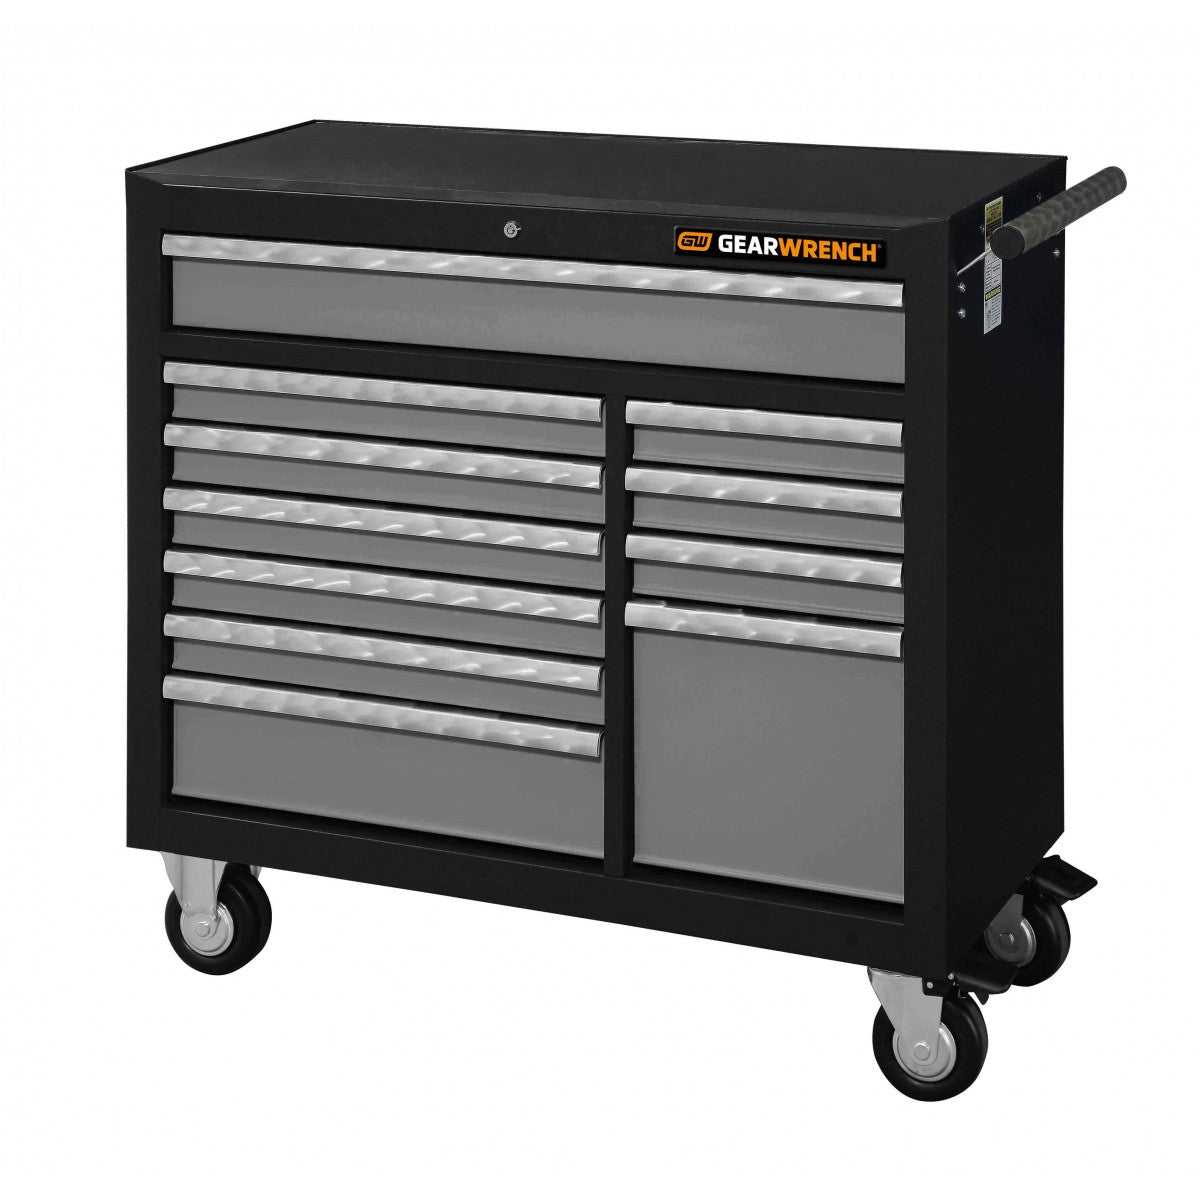 42" 11 Drawer Roller Cabinet, XL Series Black / Silver 83157 by GearWrench